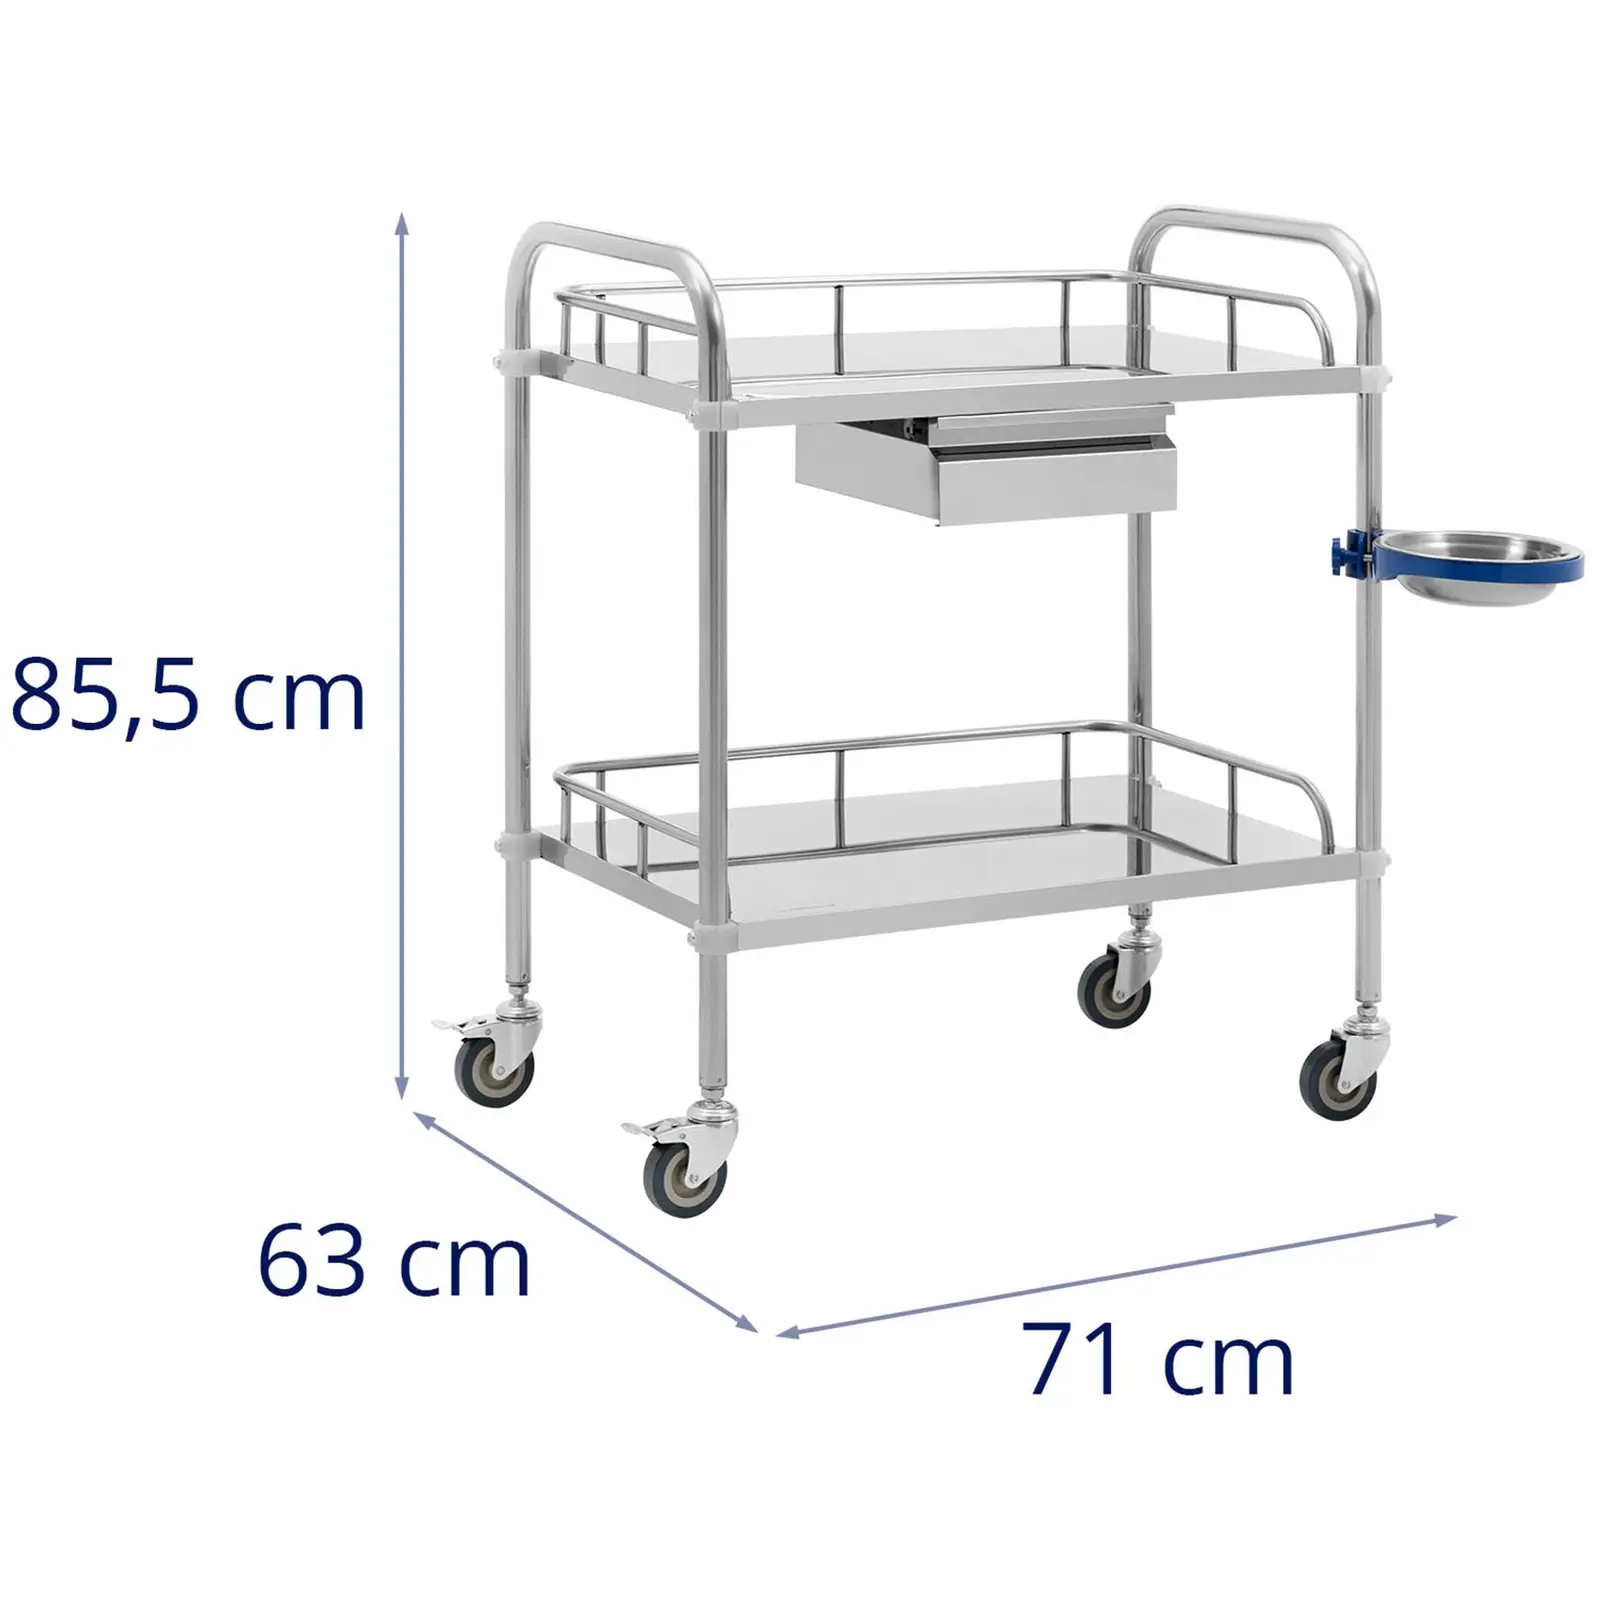 Laboratory Trolley - stainless steel - 2 shelves each 61 x 40 x 13 cm - 1 drawer - 20 kg